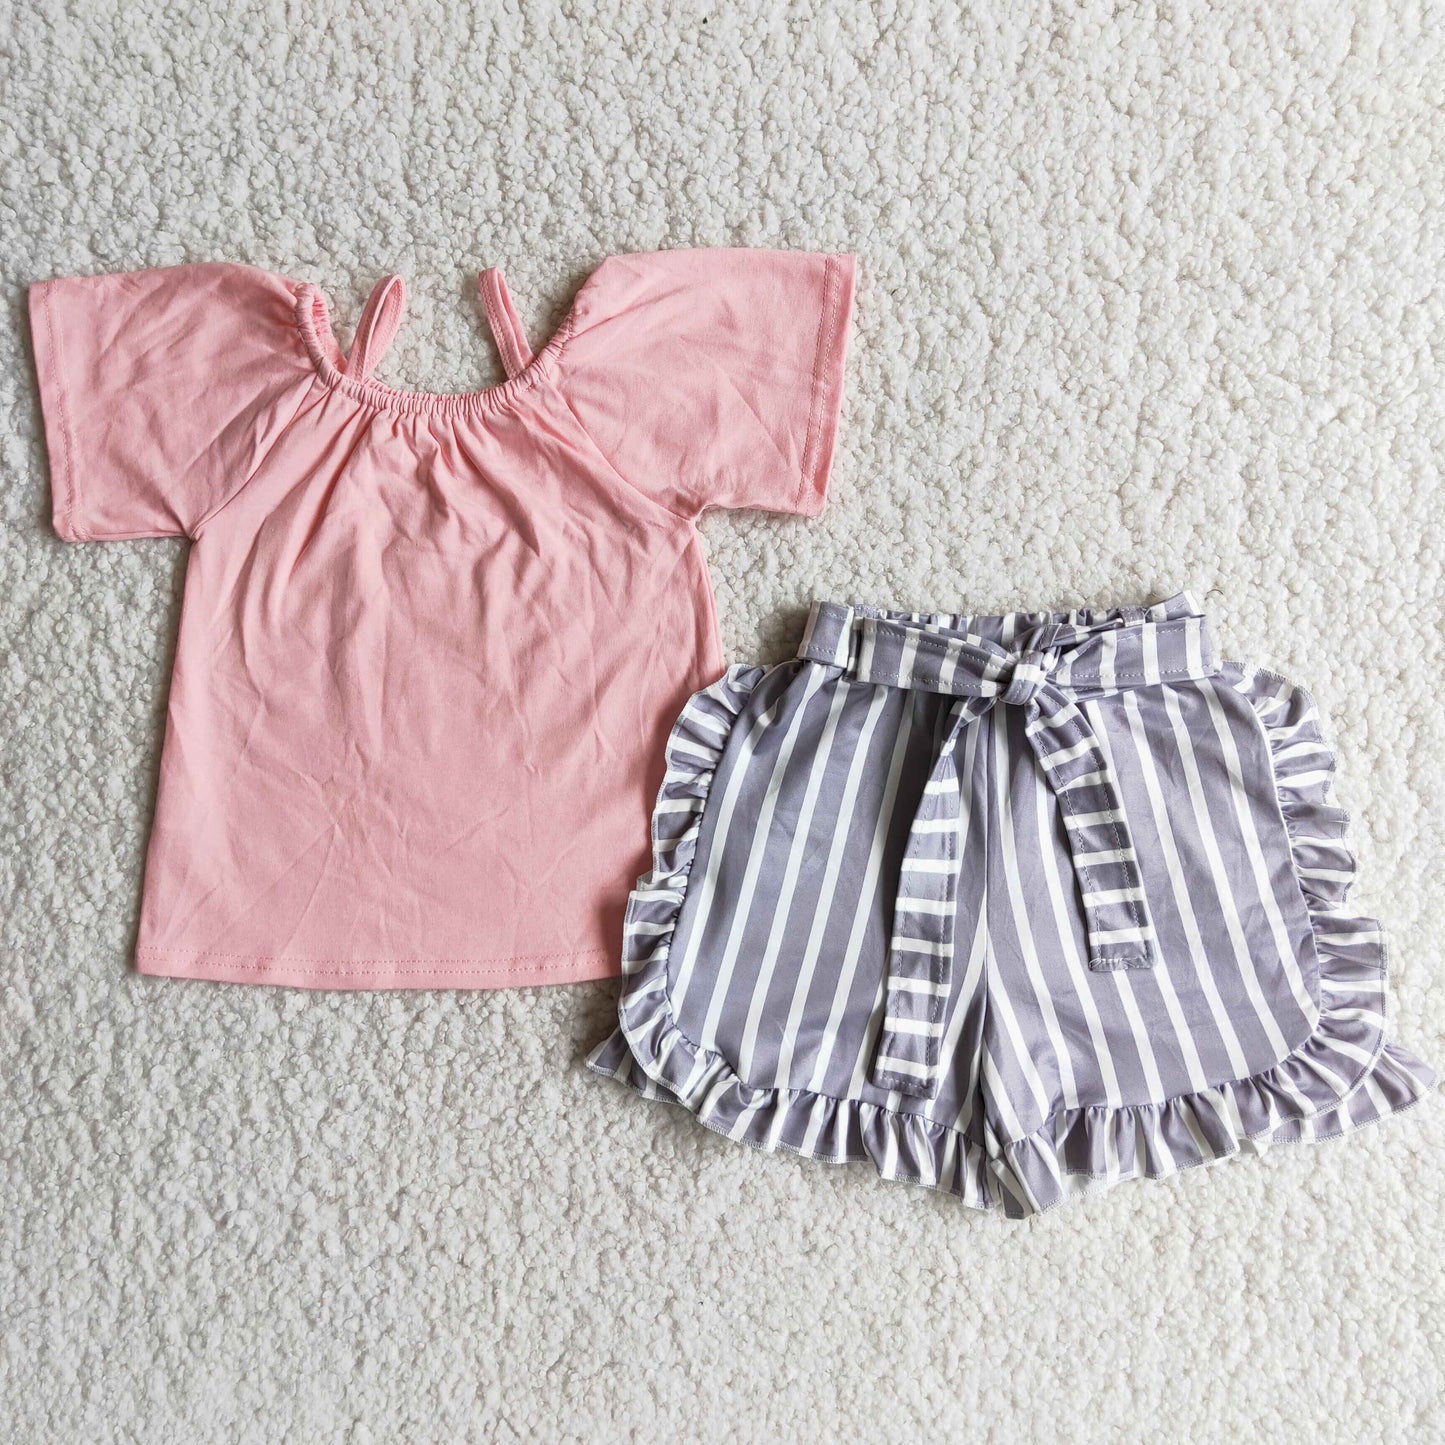 Girls pink strapes top matching shorts summer outfit